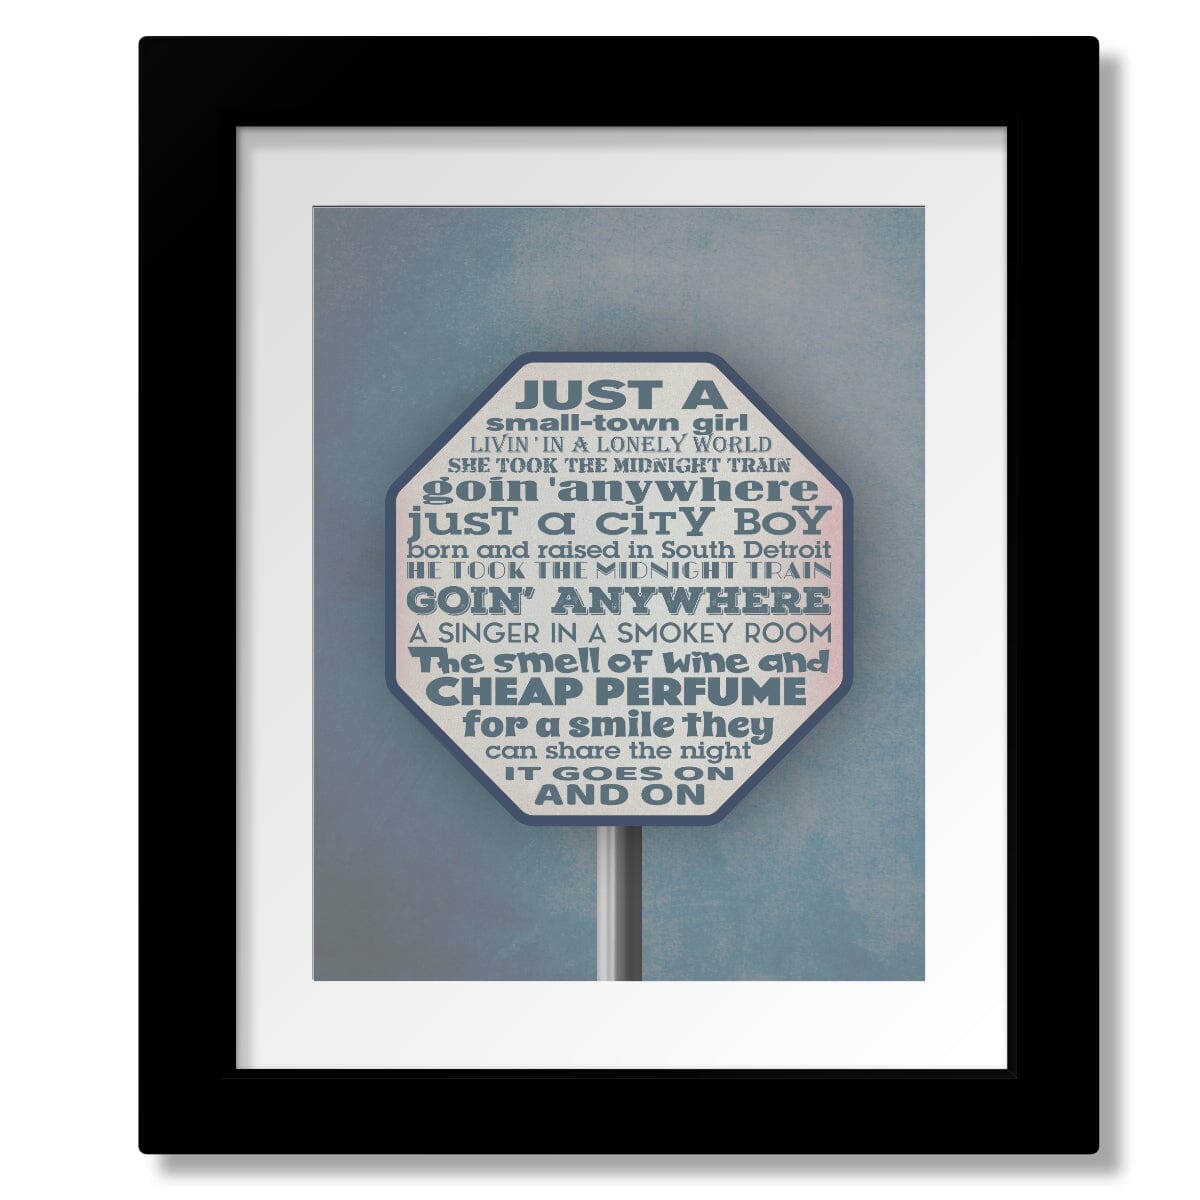 Don't Stop Believin' by Journey - Love Song Ballad Lyric Art Song Lyrics Art Song Lyrics Art 8x10 Matted and Framed Print 